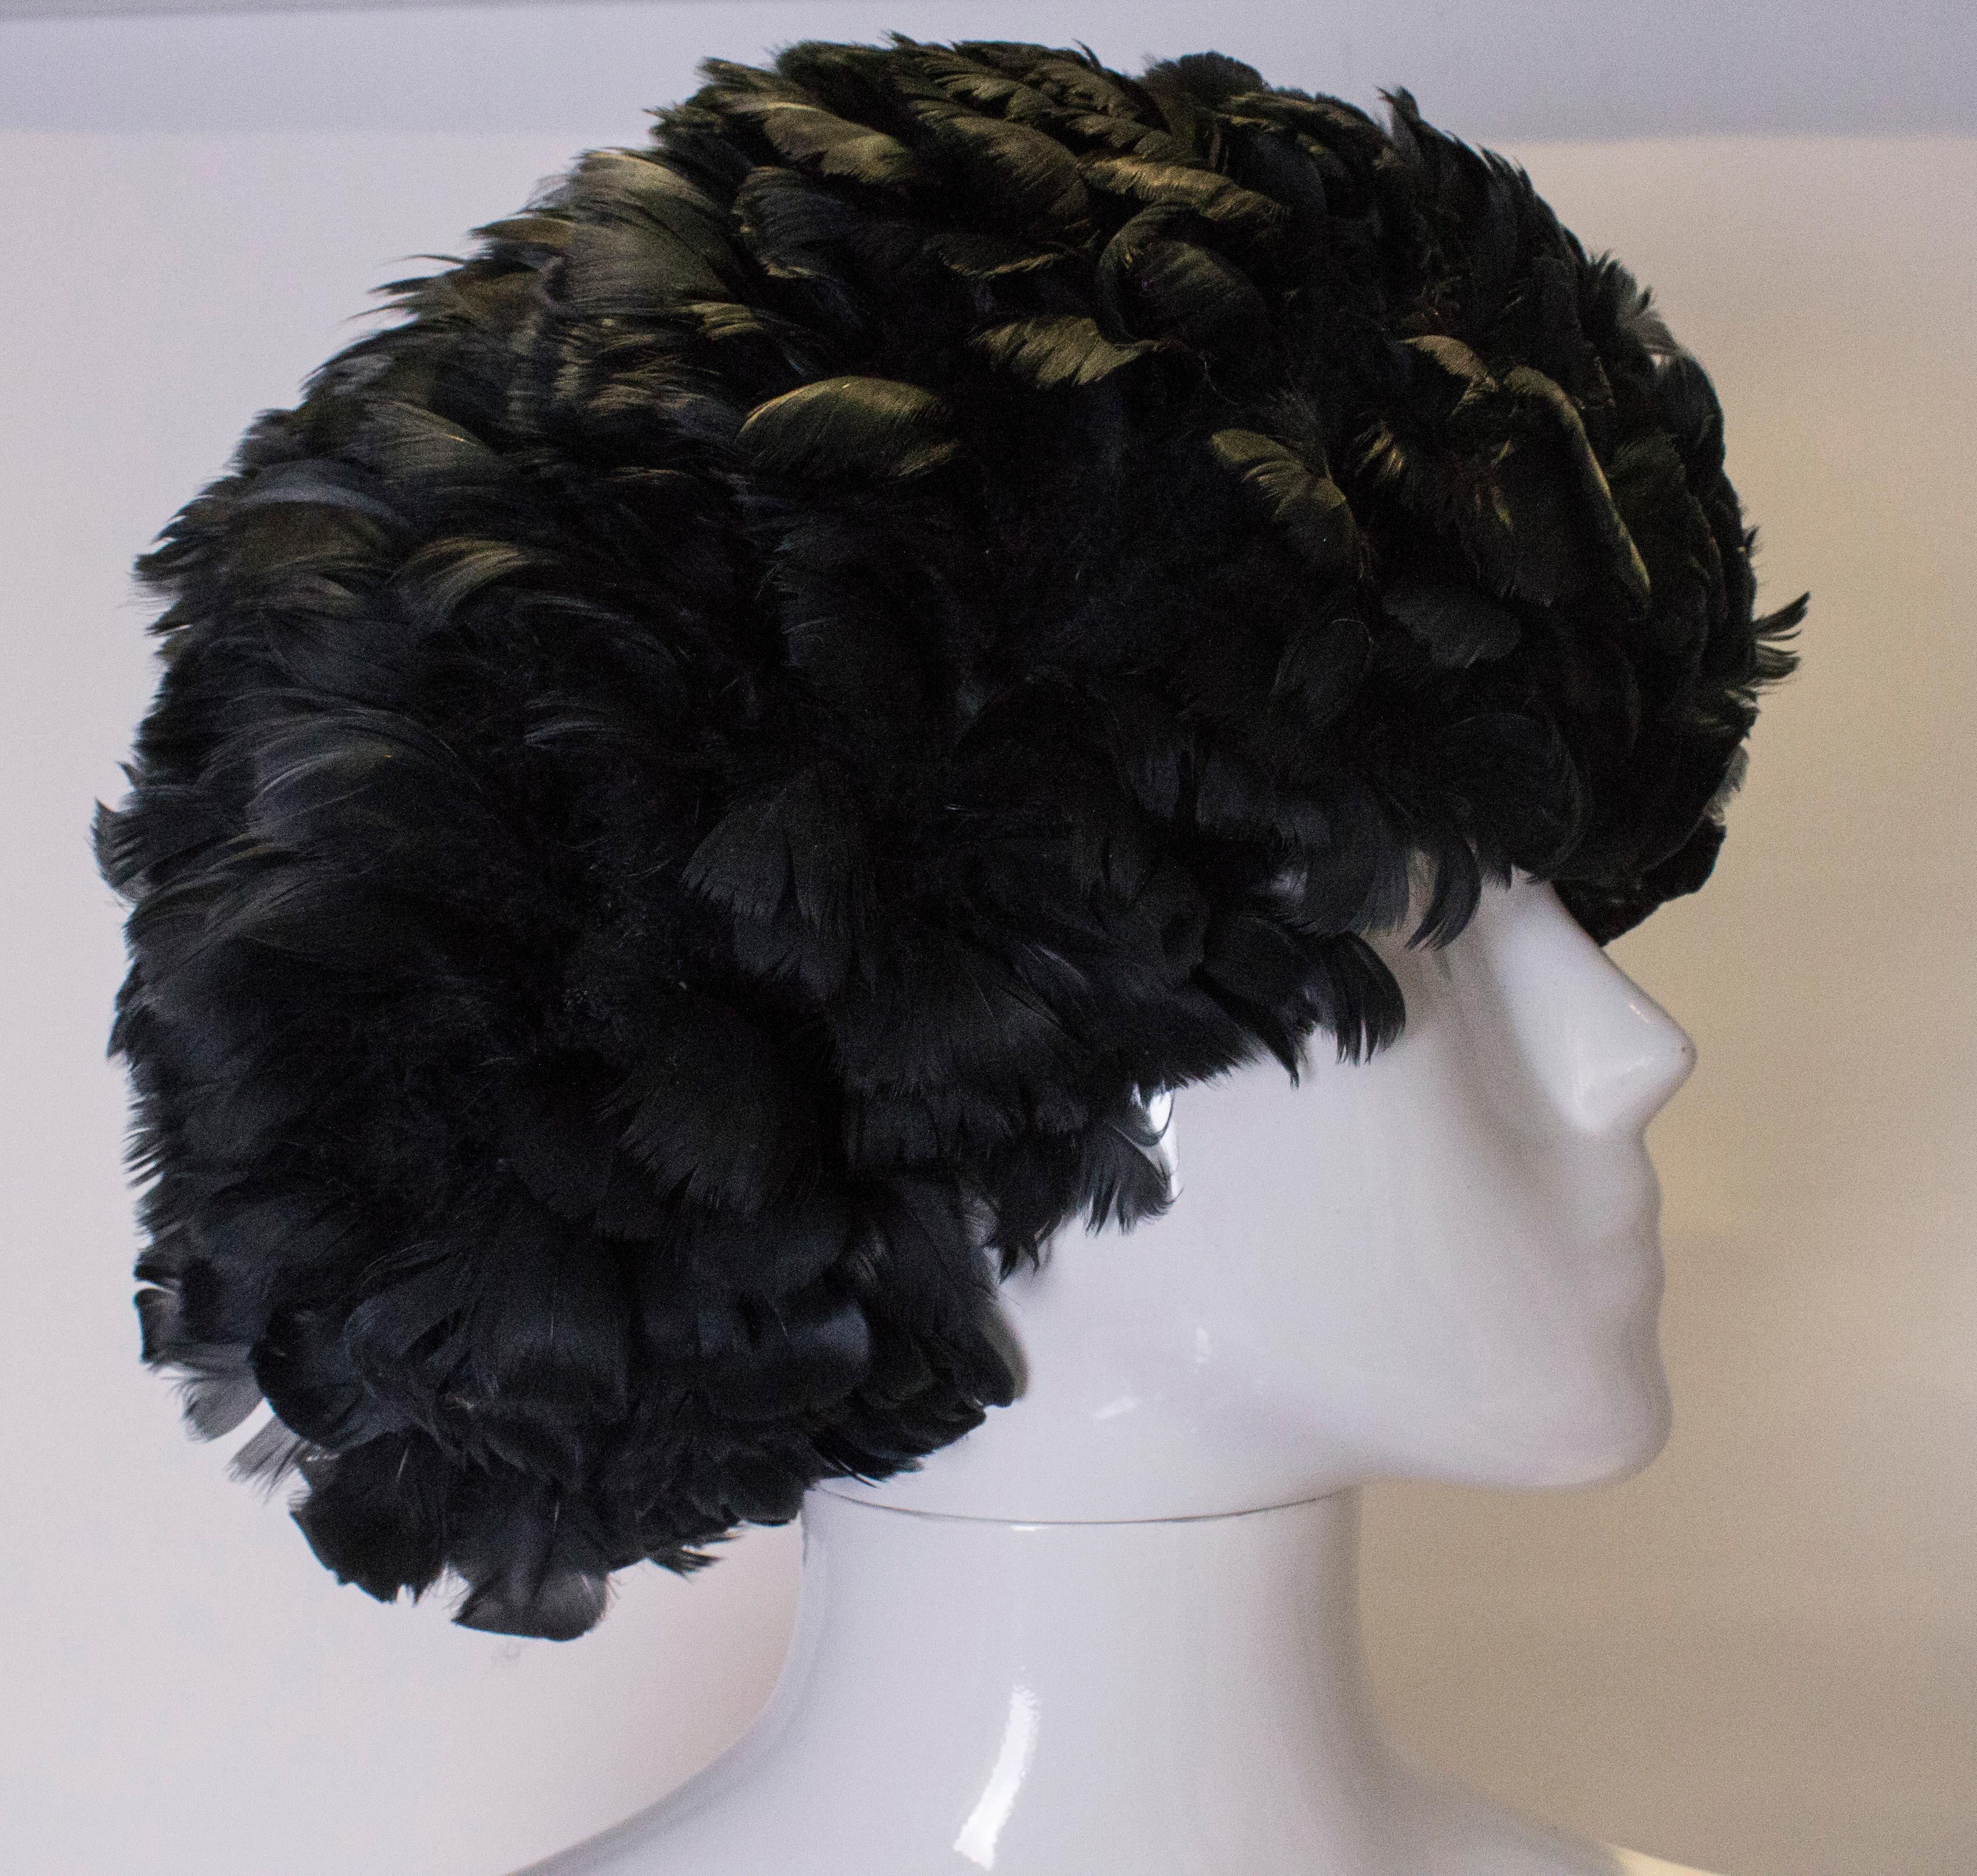 A fun and easy to wear black feather hat. The hat has a soft, pliable mesh base and so can be easily packed, it is covered with an abundance of black feathers.